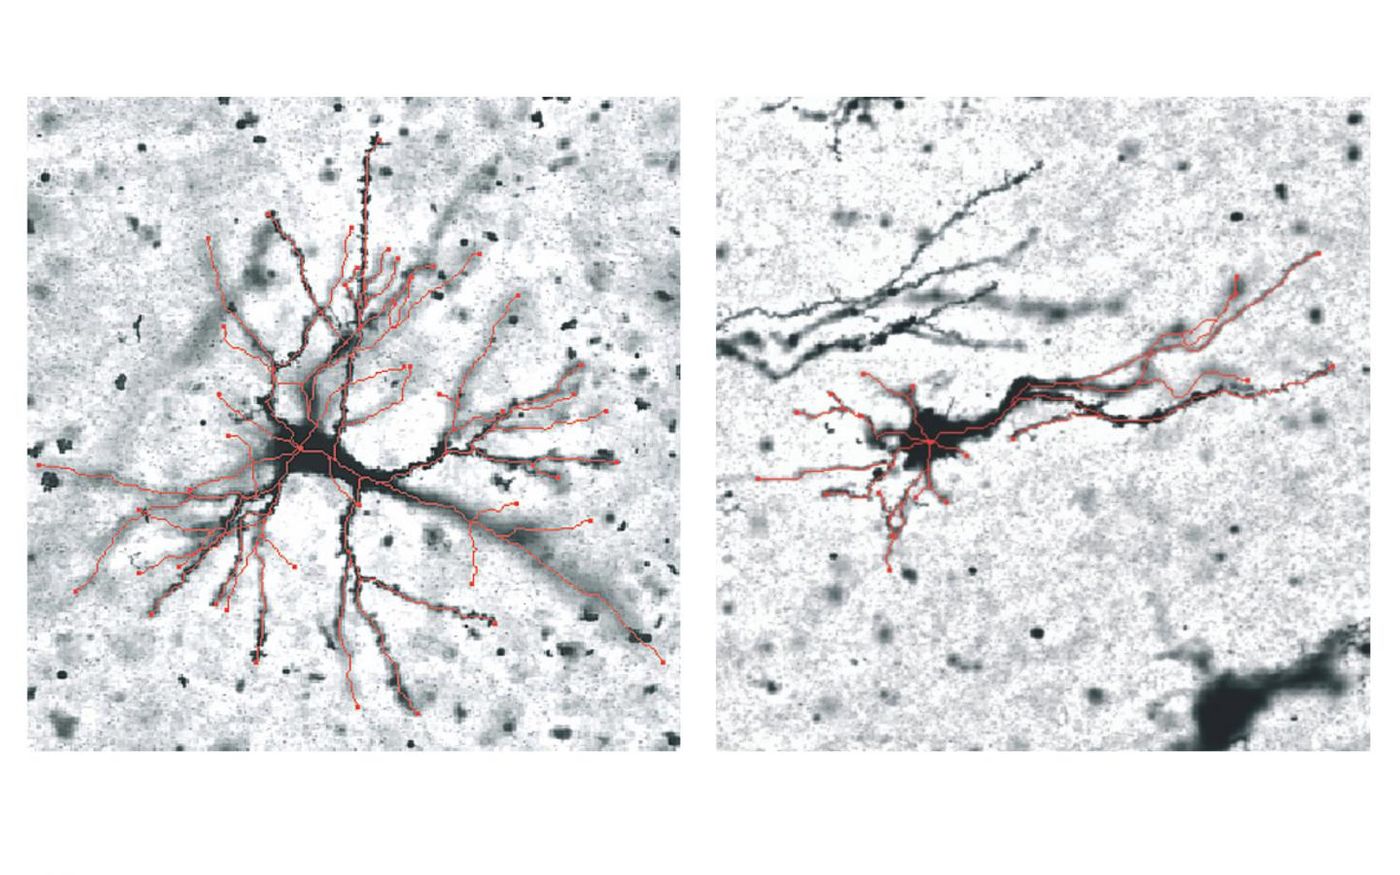 Grey matter neurons in the outward folds (left) and inward folds (right), differences shown in red. . / Credit: RMIT University